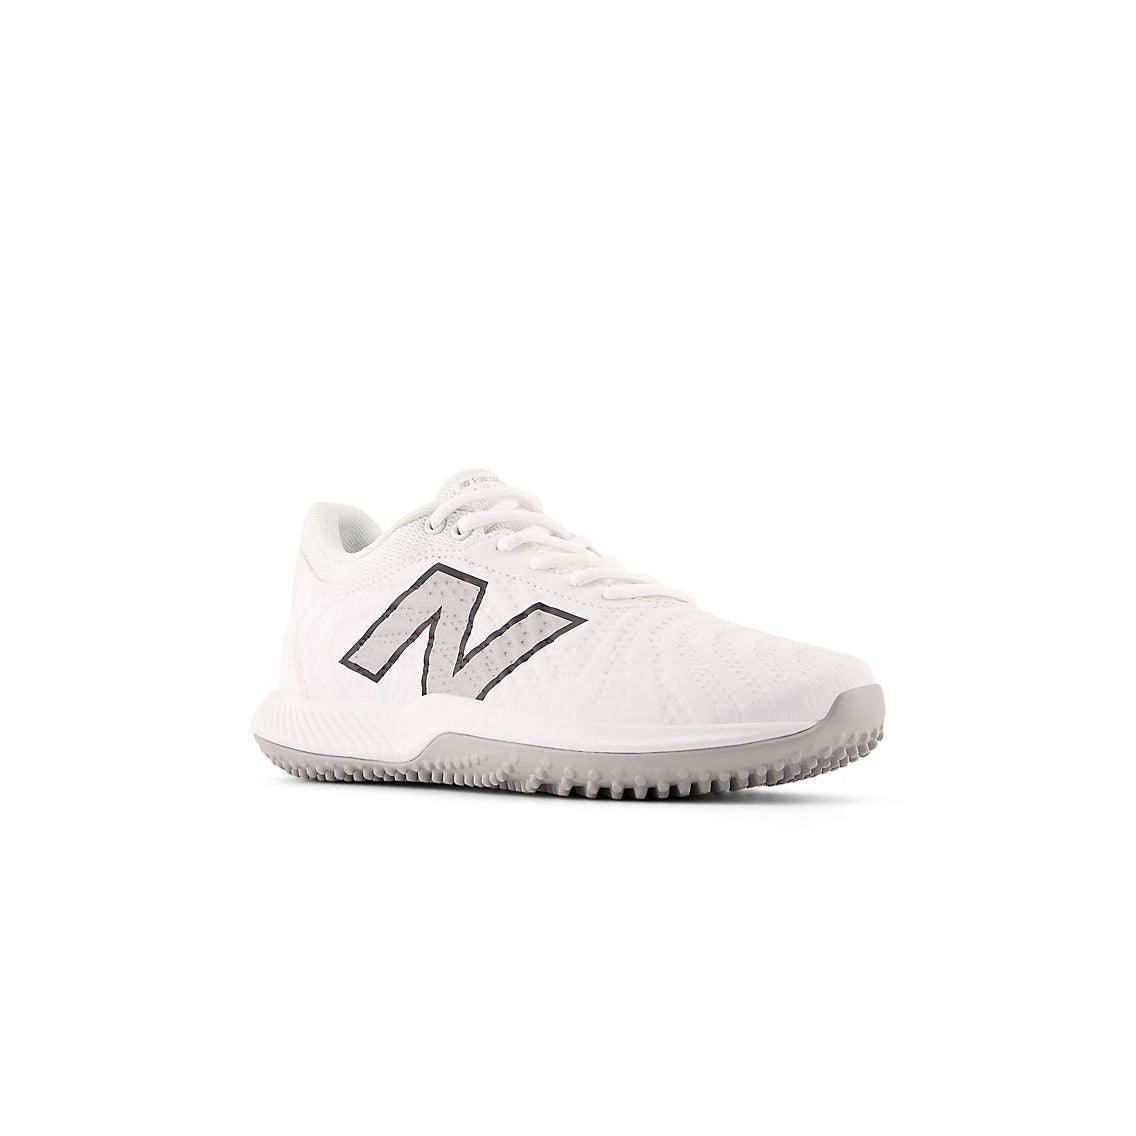 New Balance Women's FuelCell FUSE v4 Turf Trainer Softball Shoes - Optic White/Raincloud - STFUSEW4